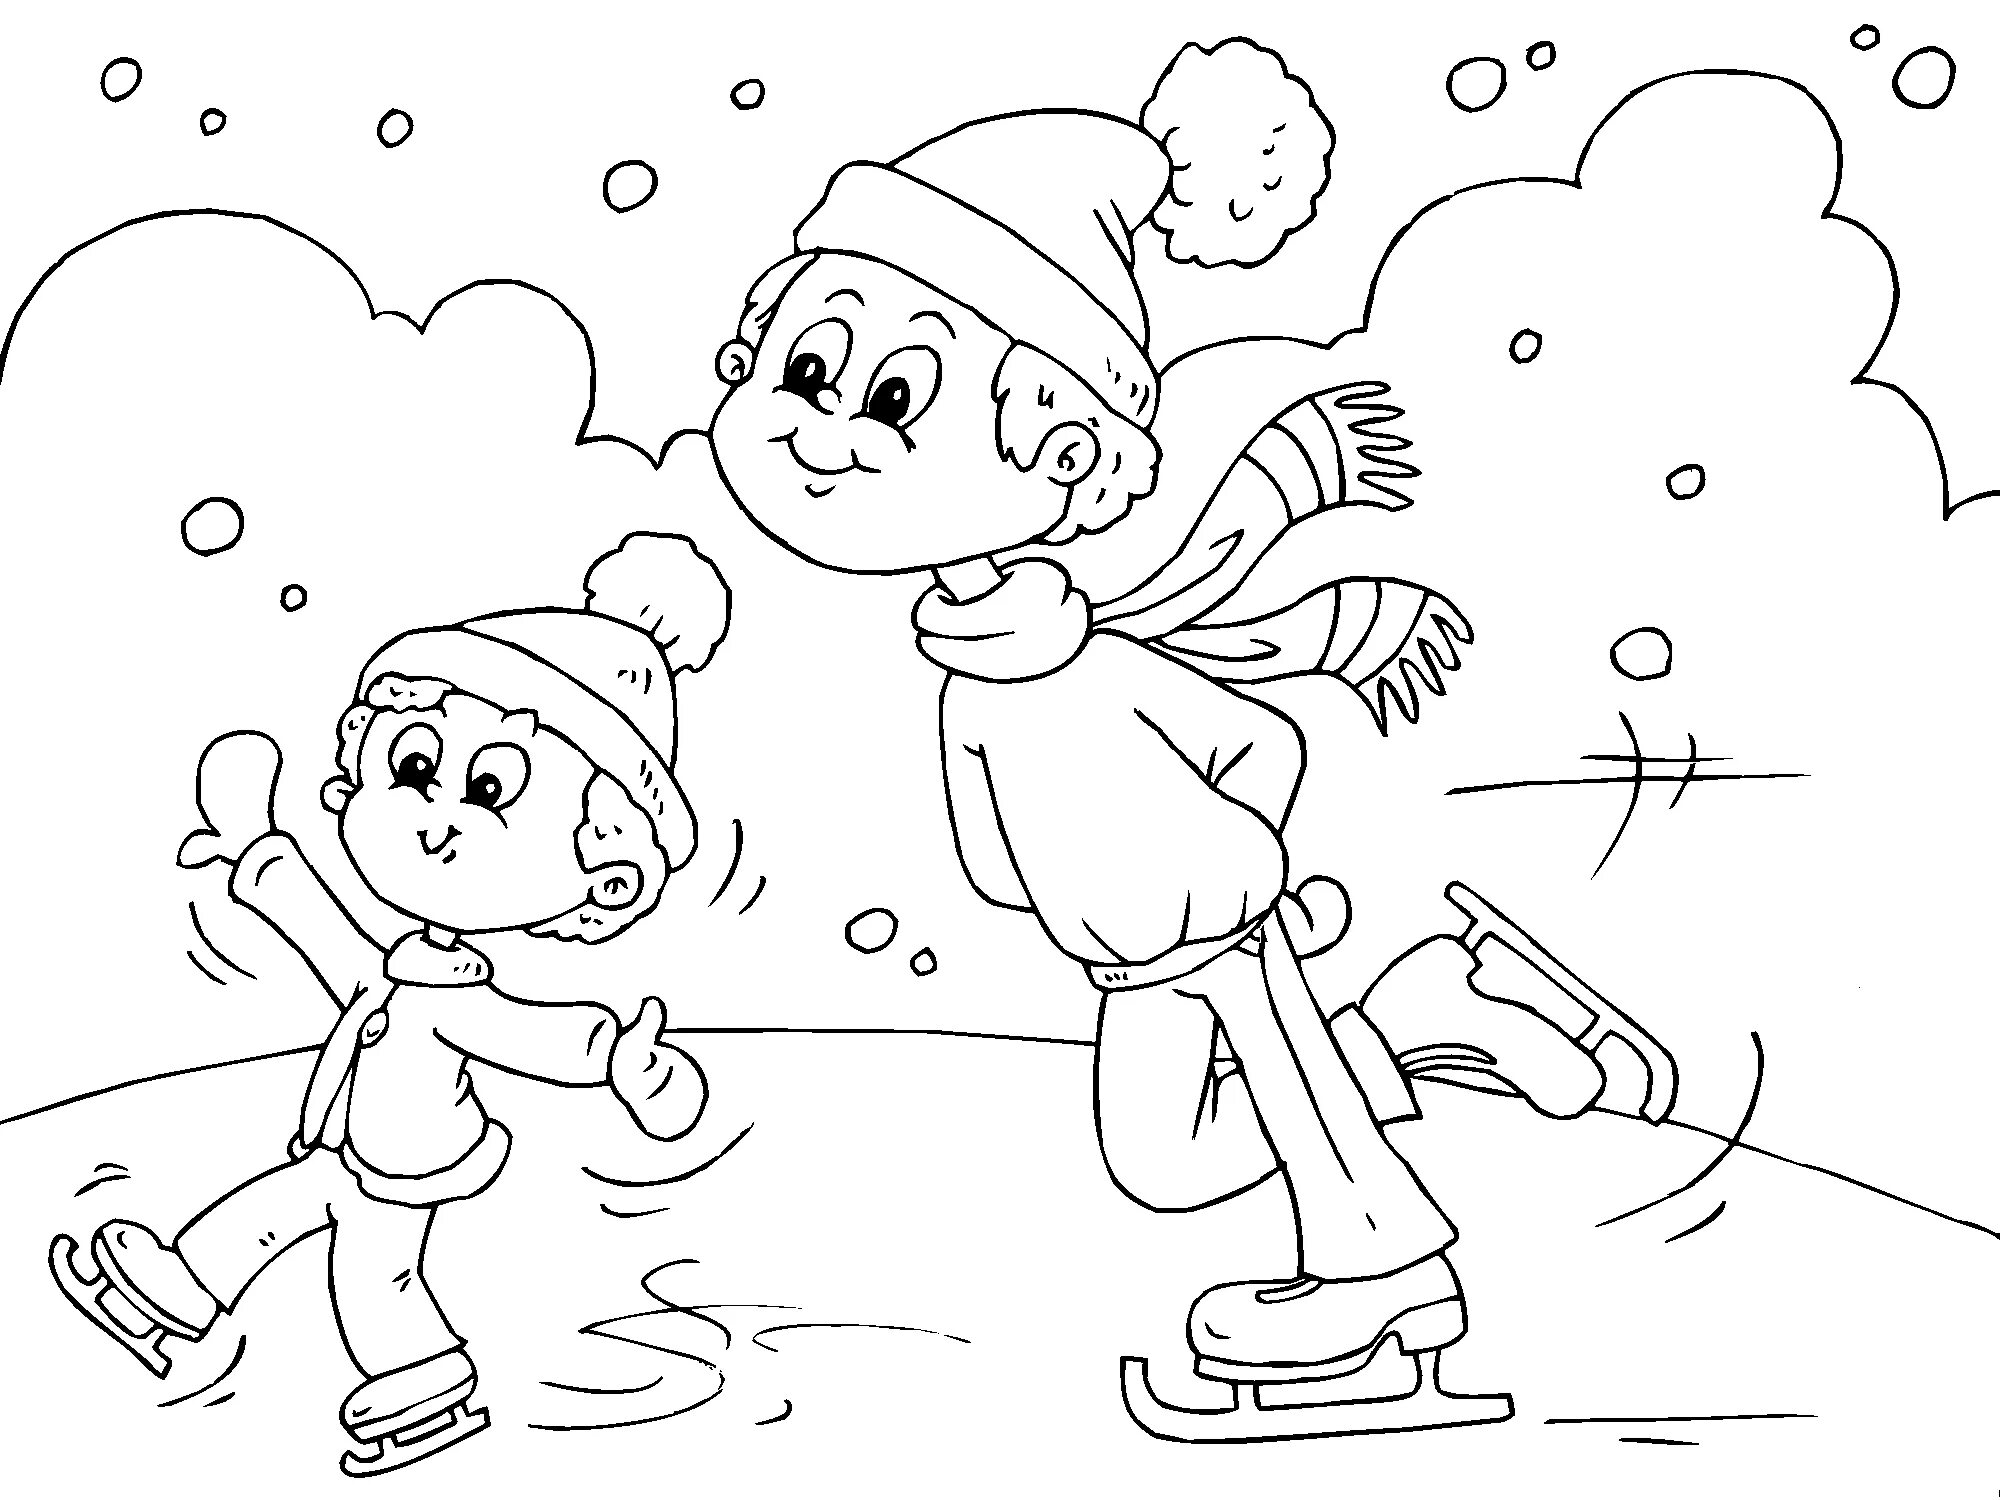 Amazing skating rink coloring book for kids